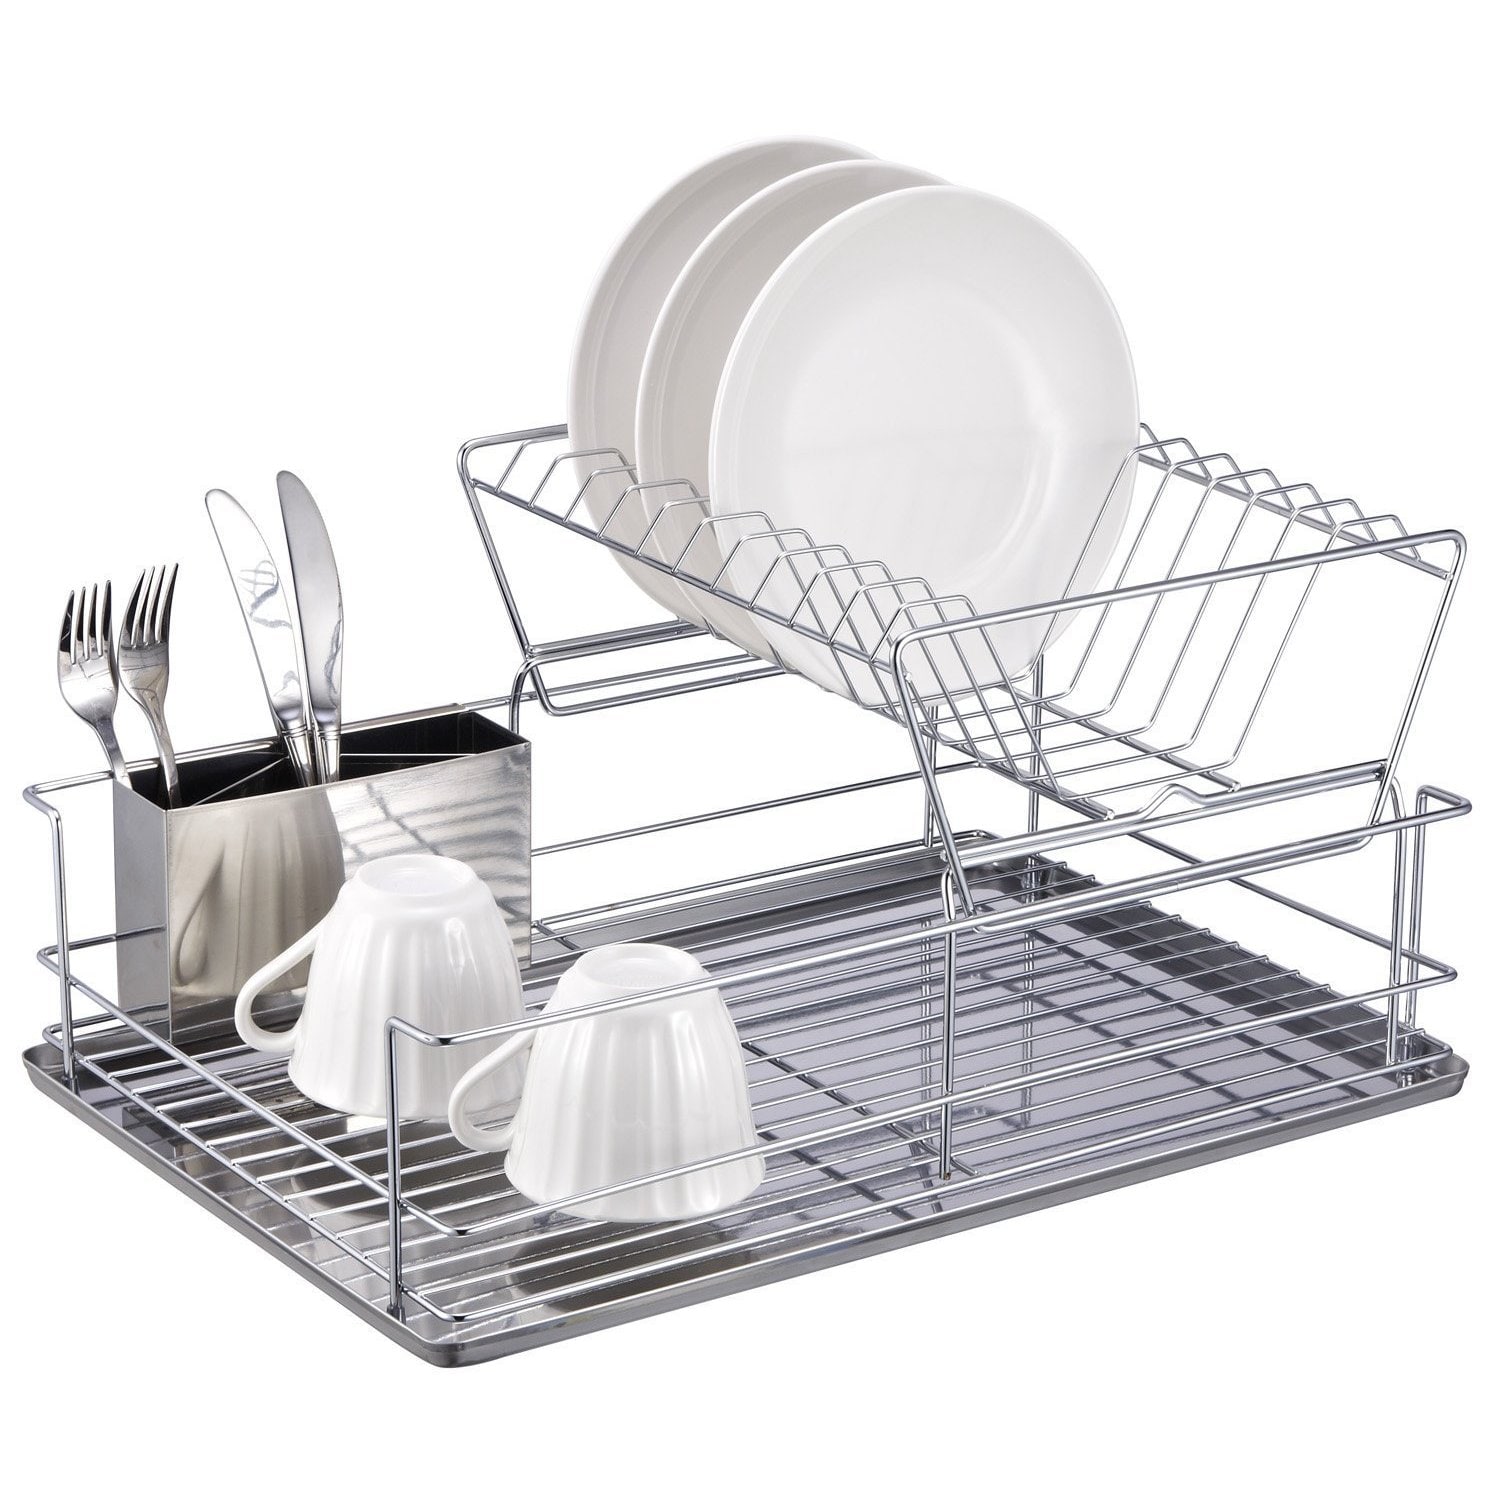 https://ak1.ostkcdn.com/images/products/11734844/22-Chrome-Dish-Rack-with-Utensil-Holder-Cup-Rack-and-Tray-f240fe63-09e8-473d-a56d-41a52d0d132b.jpg